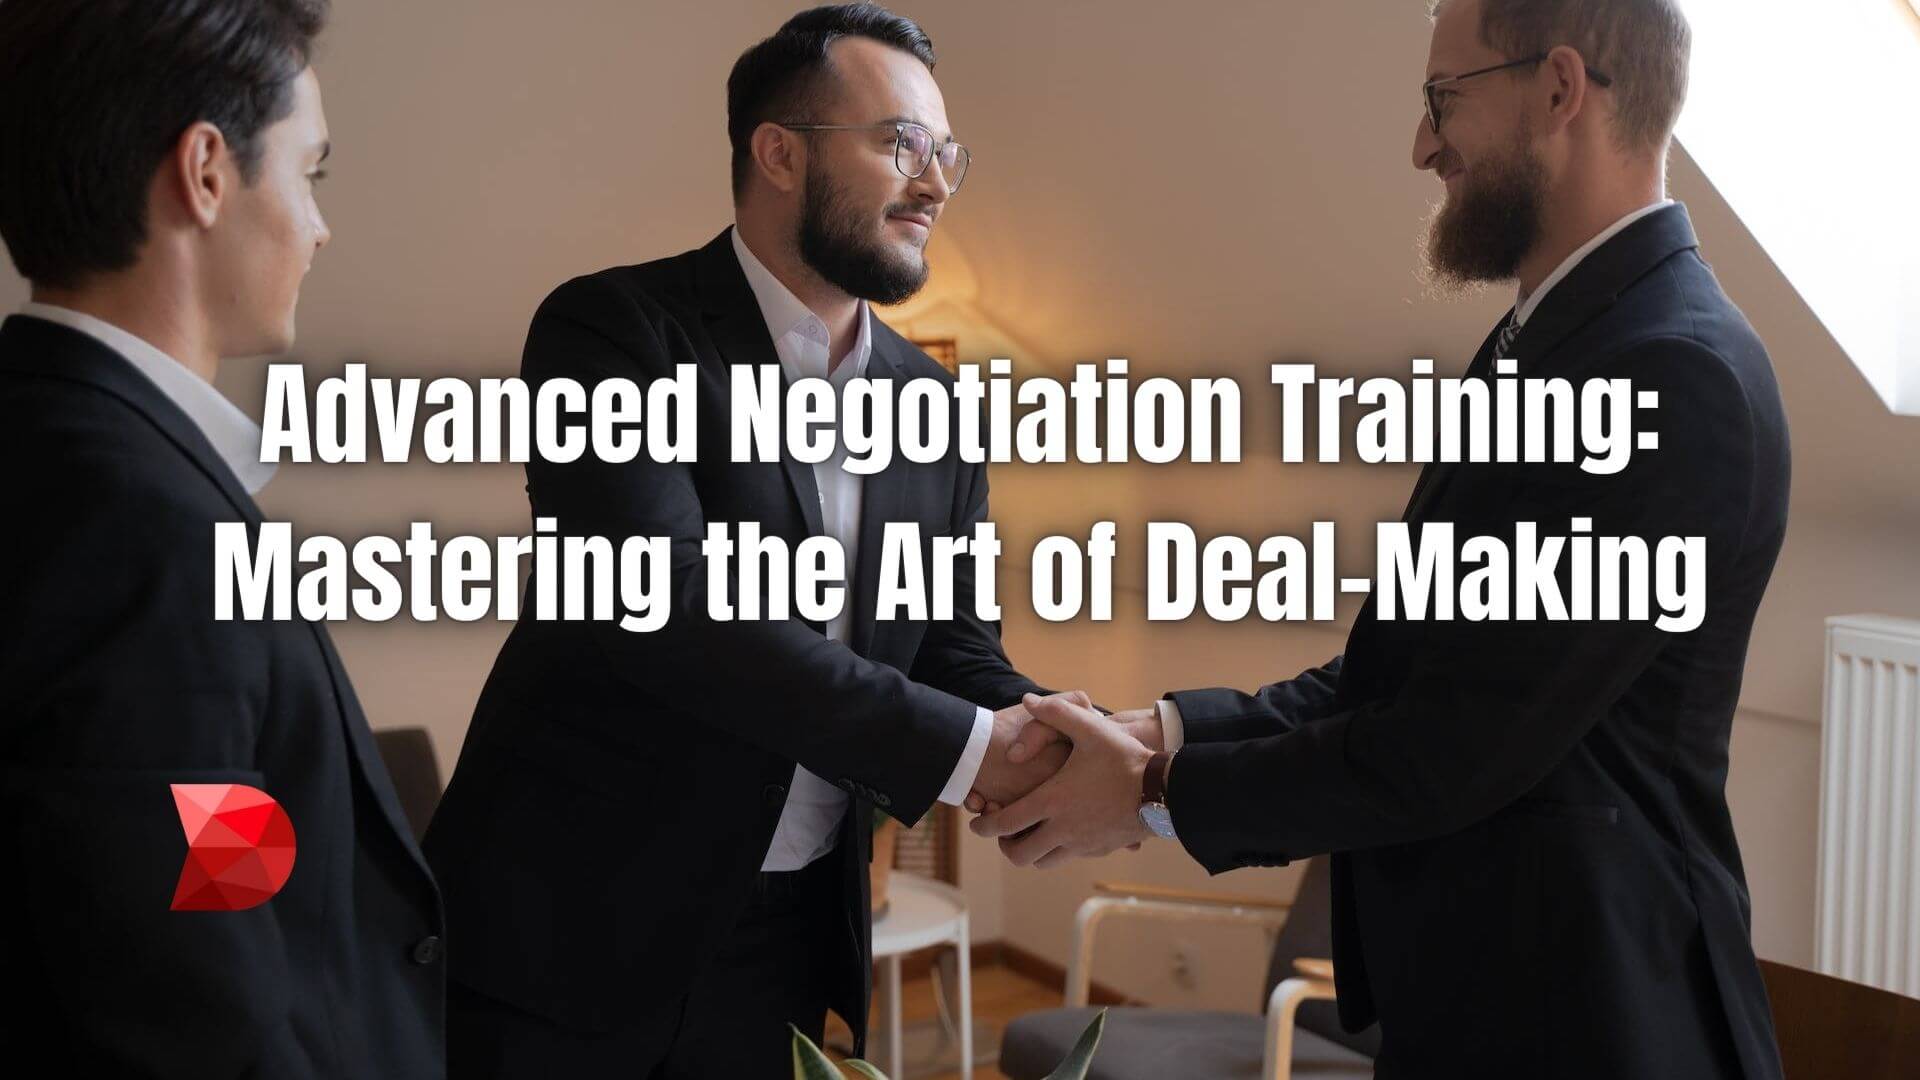 Unlock the secrets of advanced negotiation through this training guide. Click here to level up your techniques for successful deals!